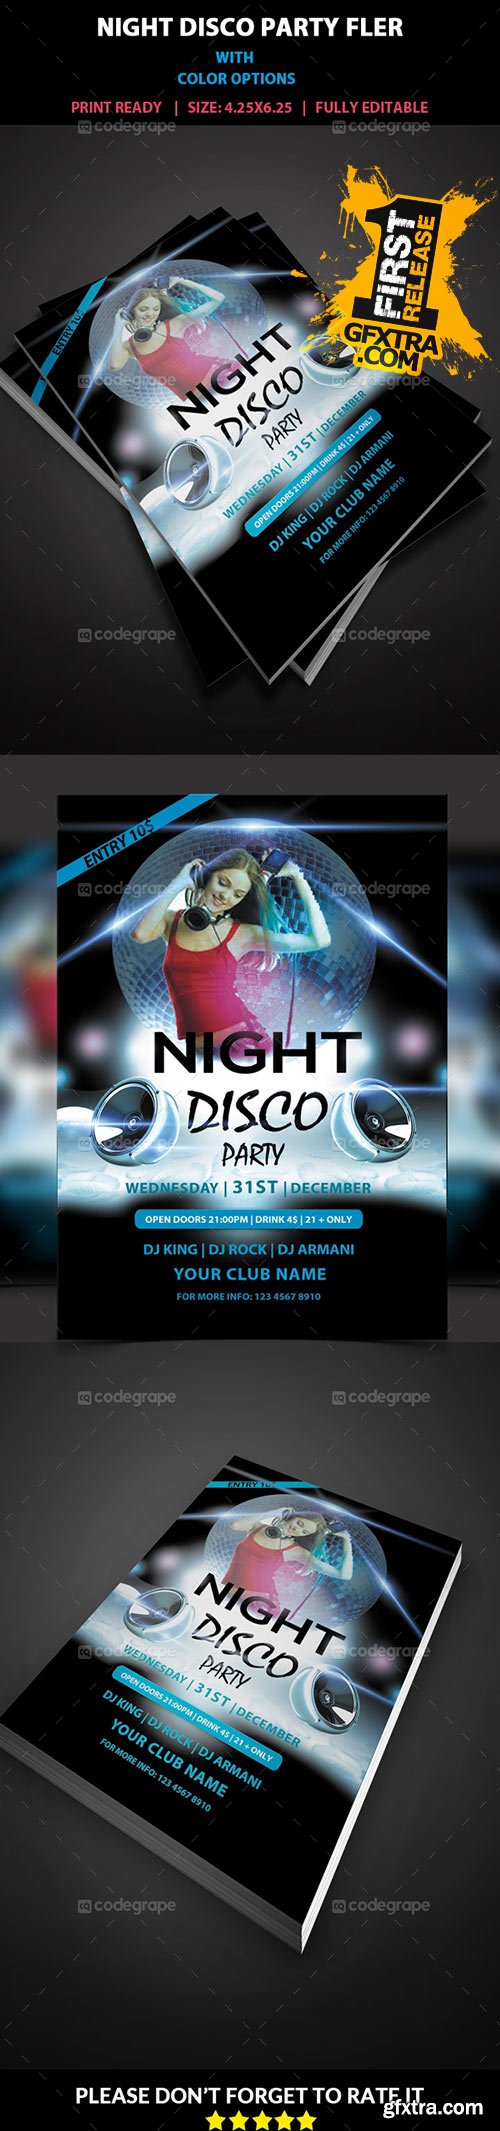 CodeGrape - Night Party Flyer 5314